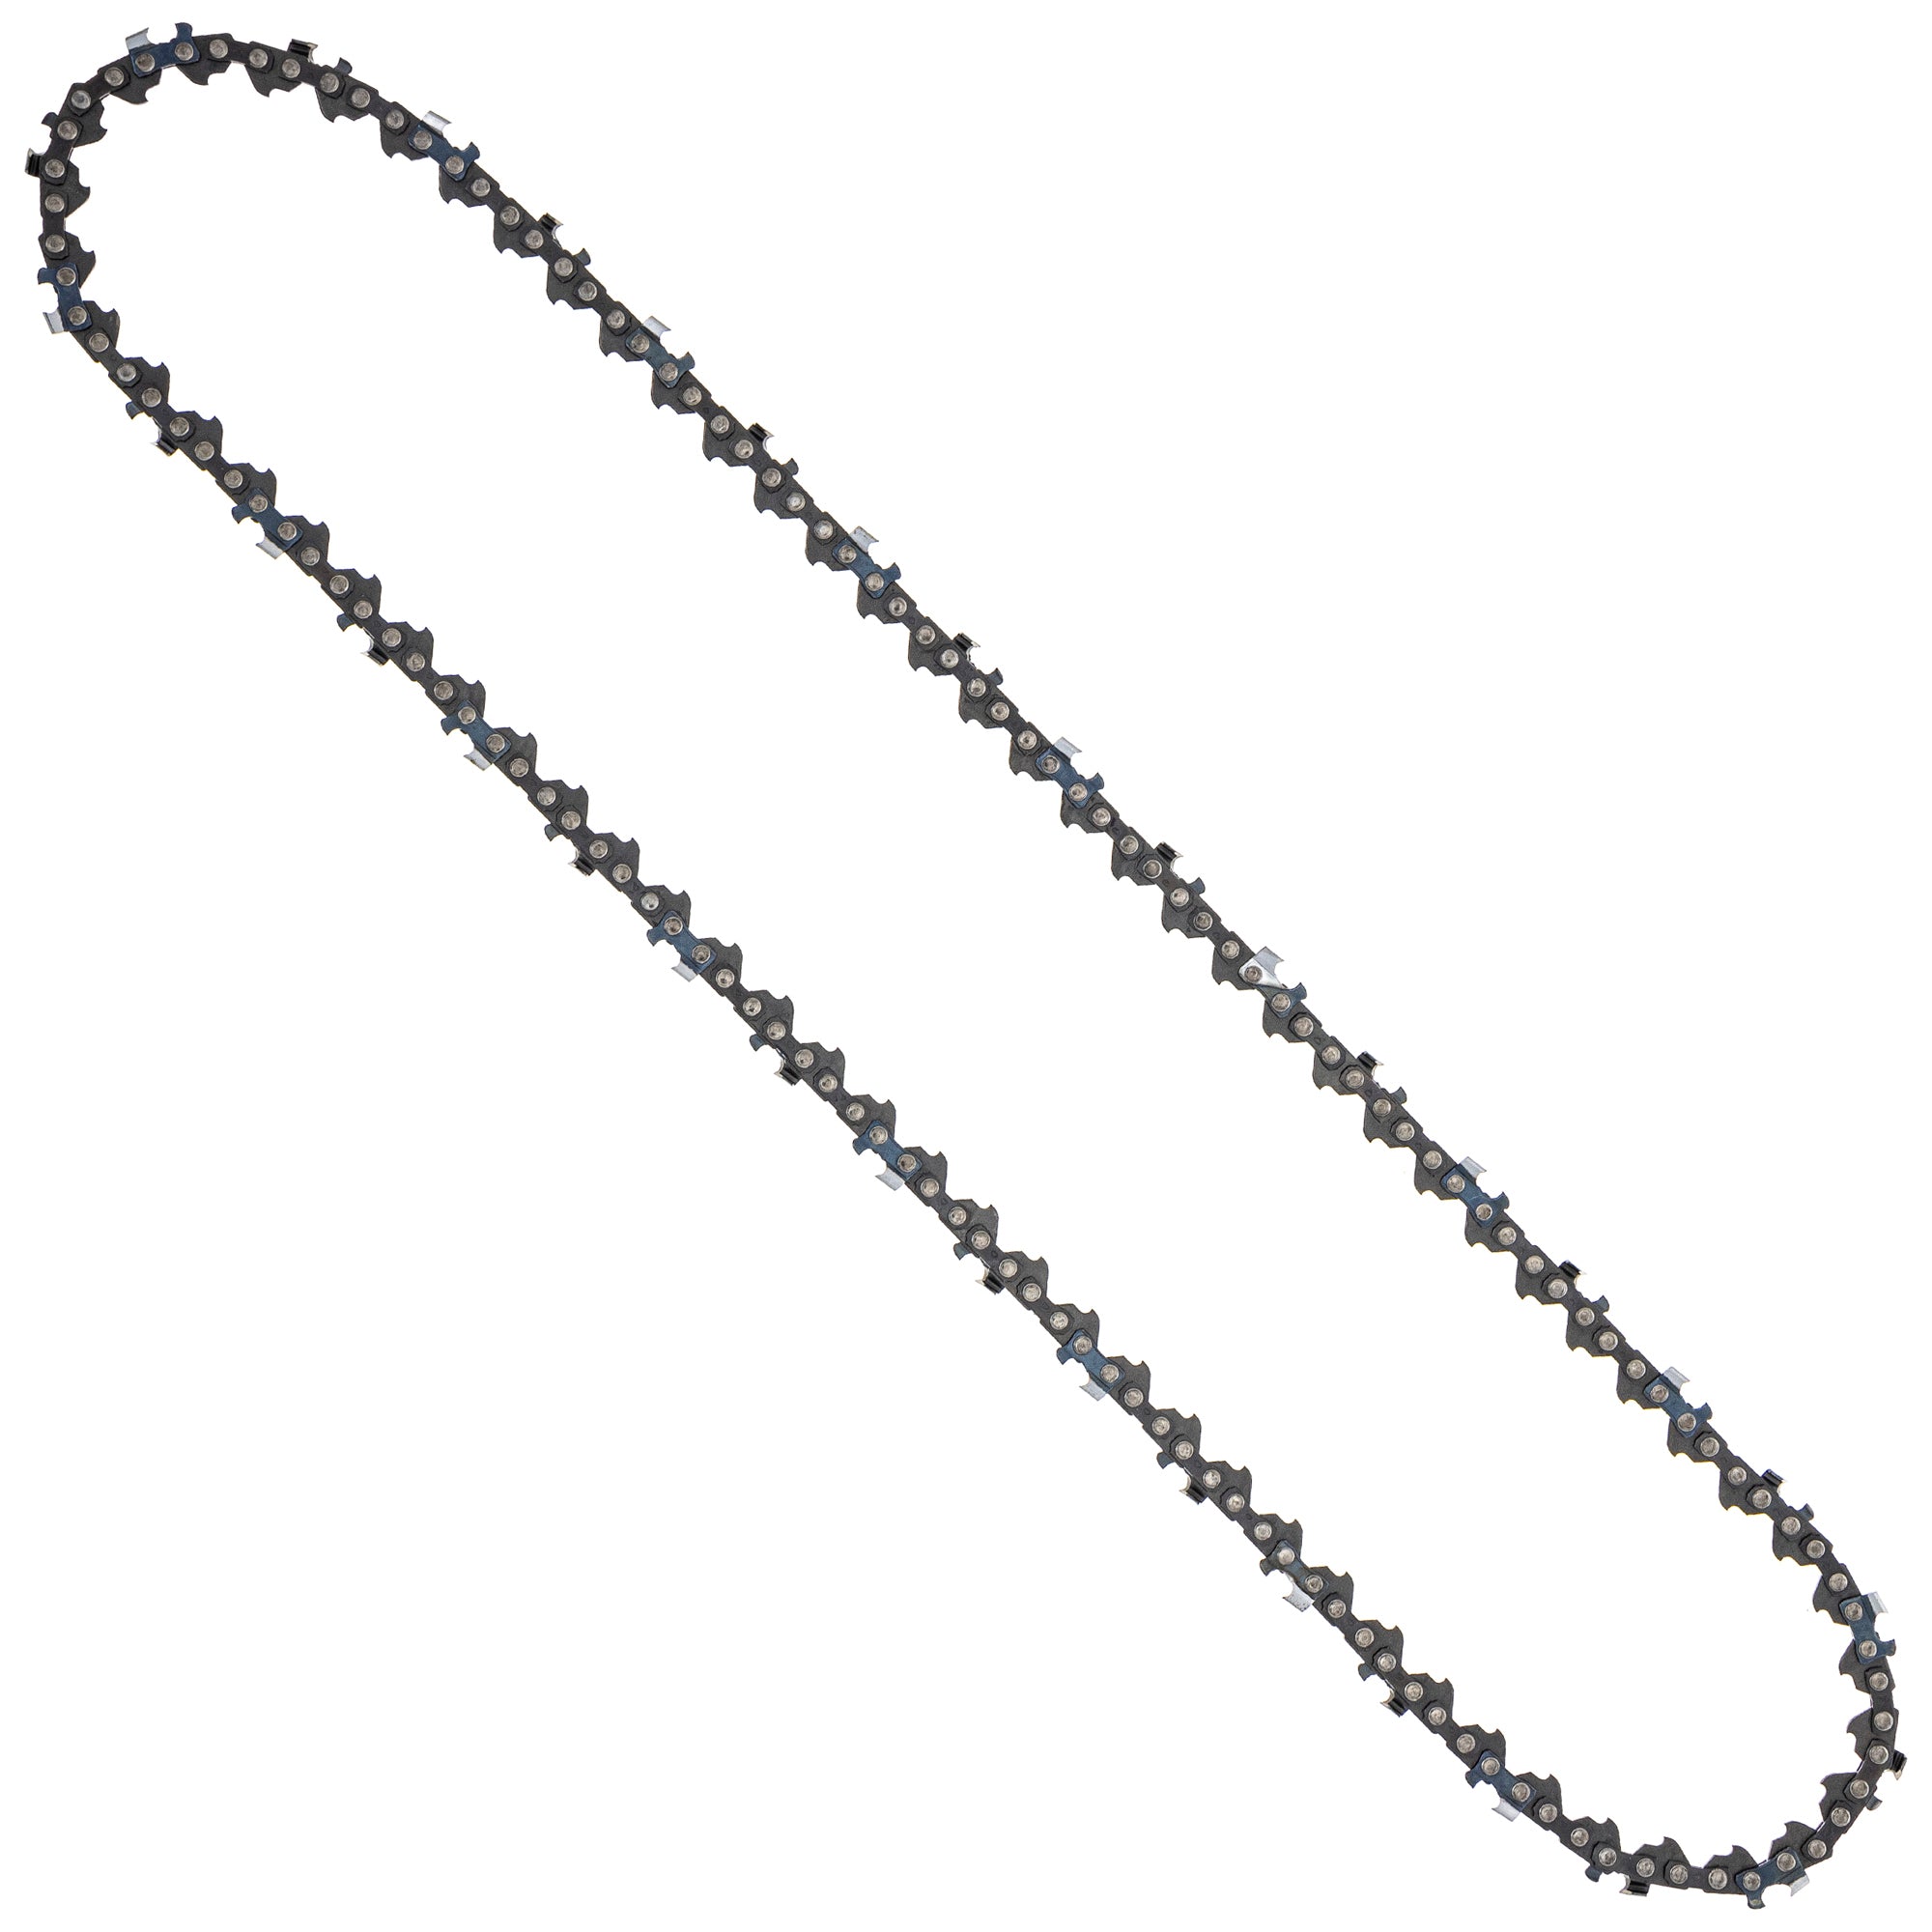 8TEN 810-CCC2296H Chain 4-Pack for zOTHER MSA 14